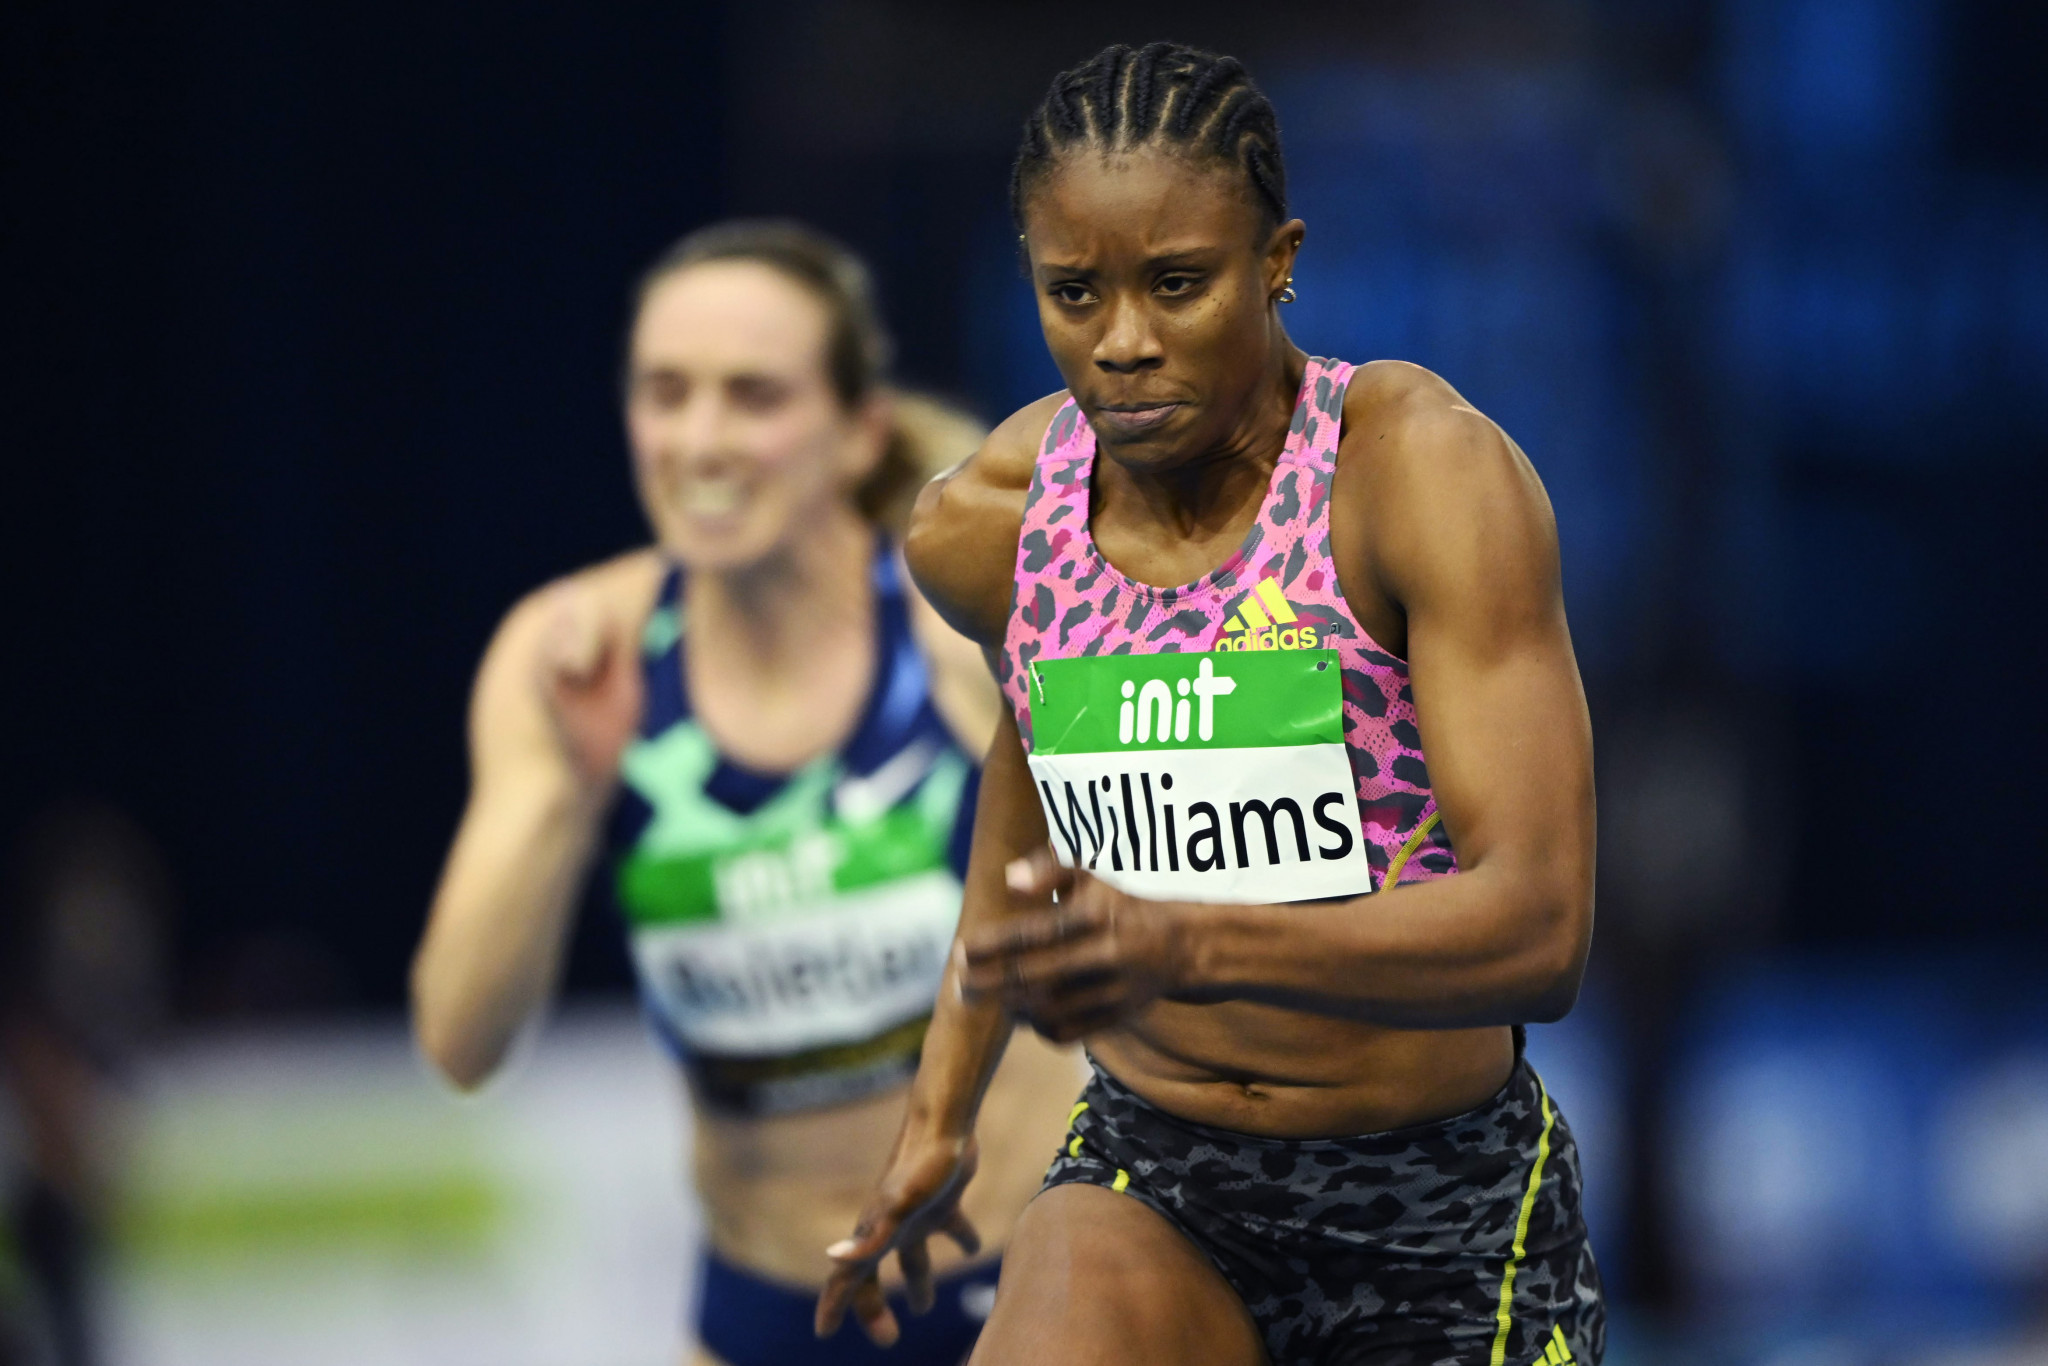 Danielle Williams won World Championship gold in 2015 ©Getty Images